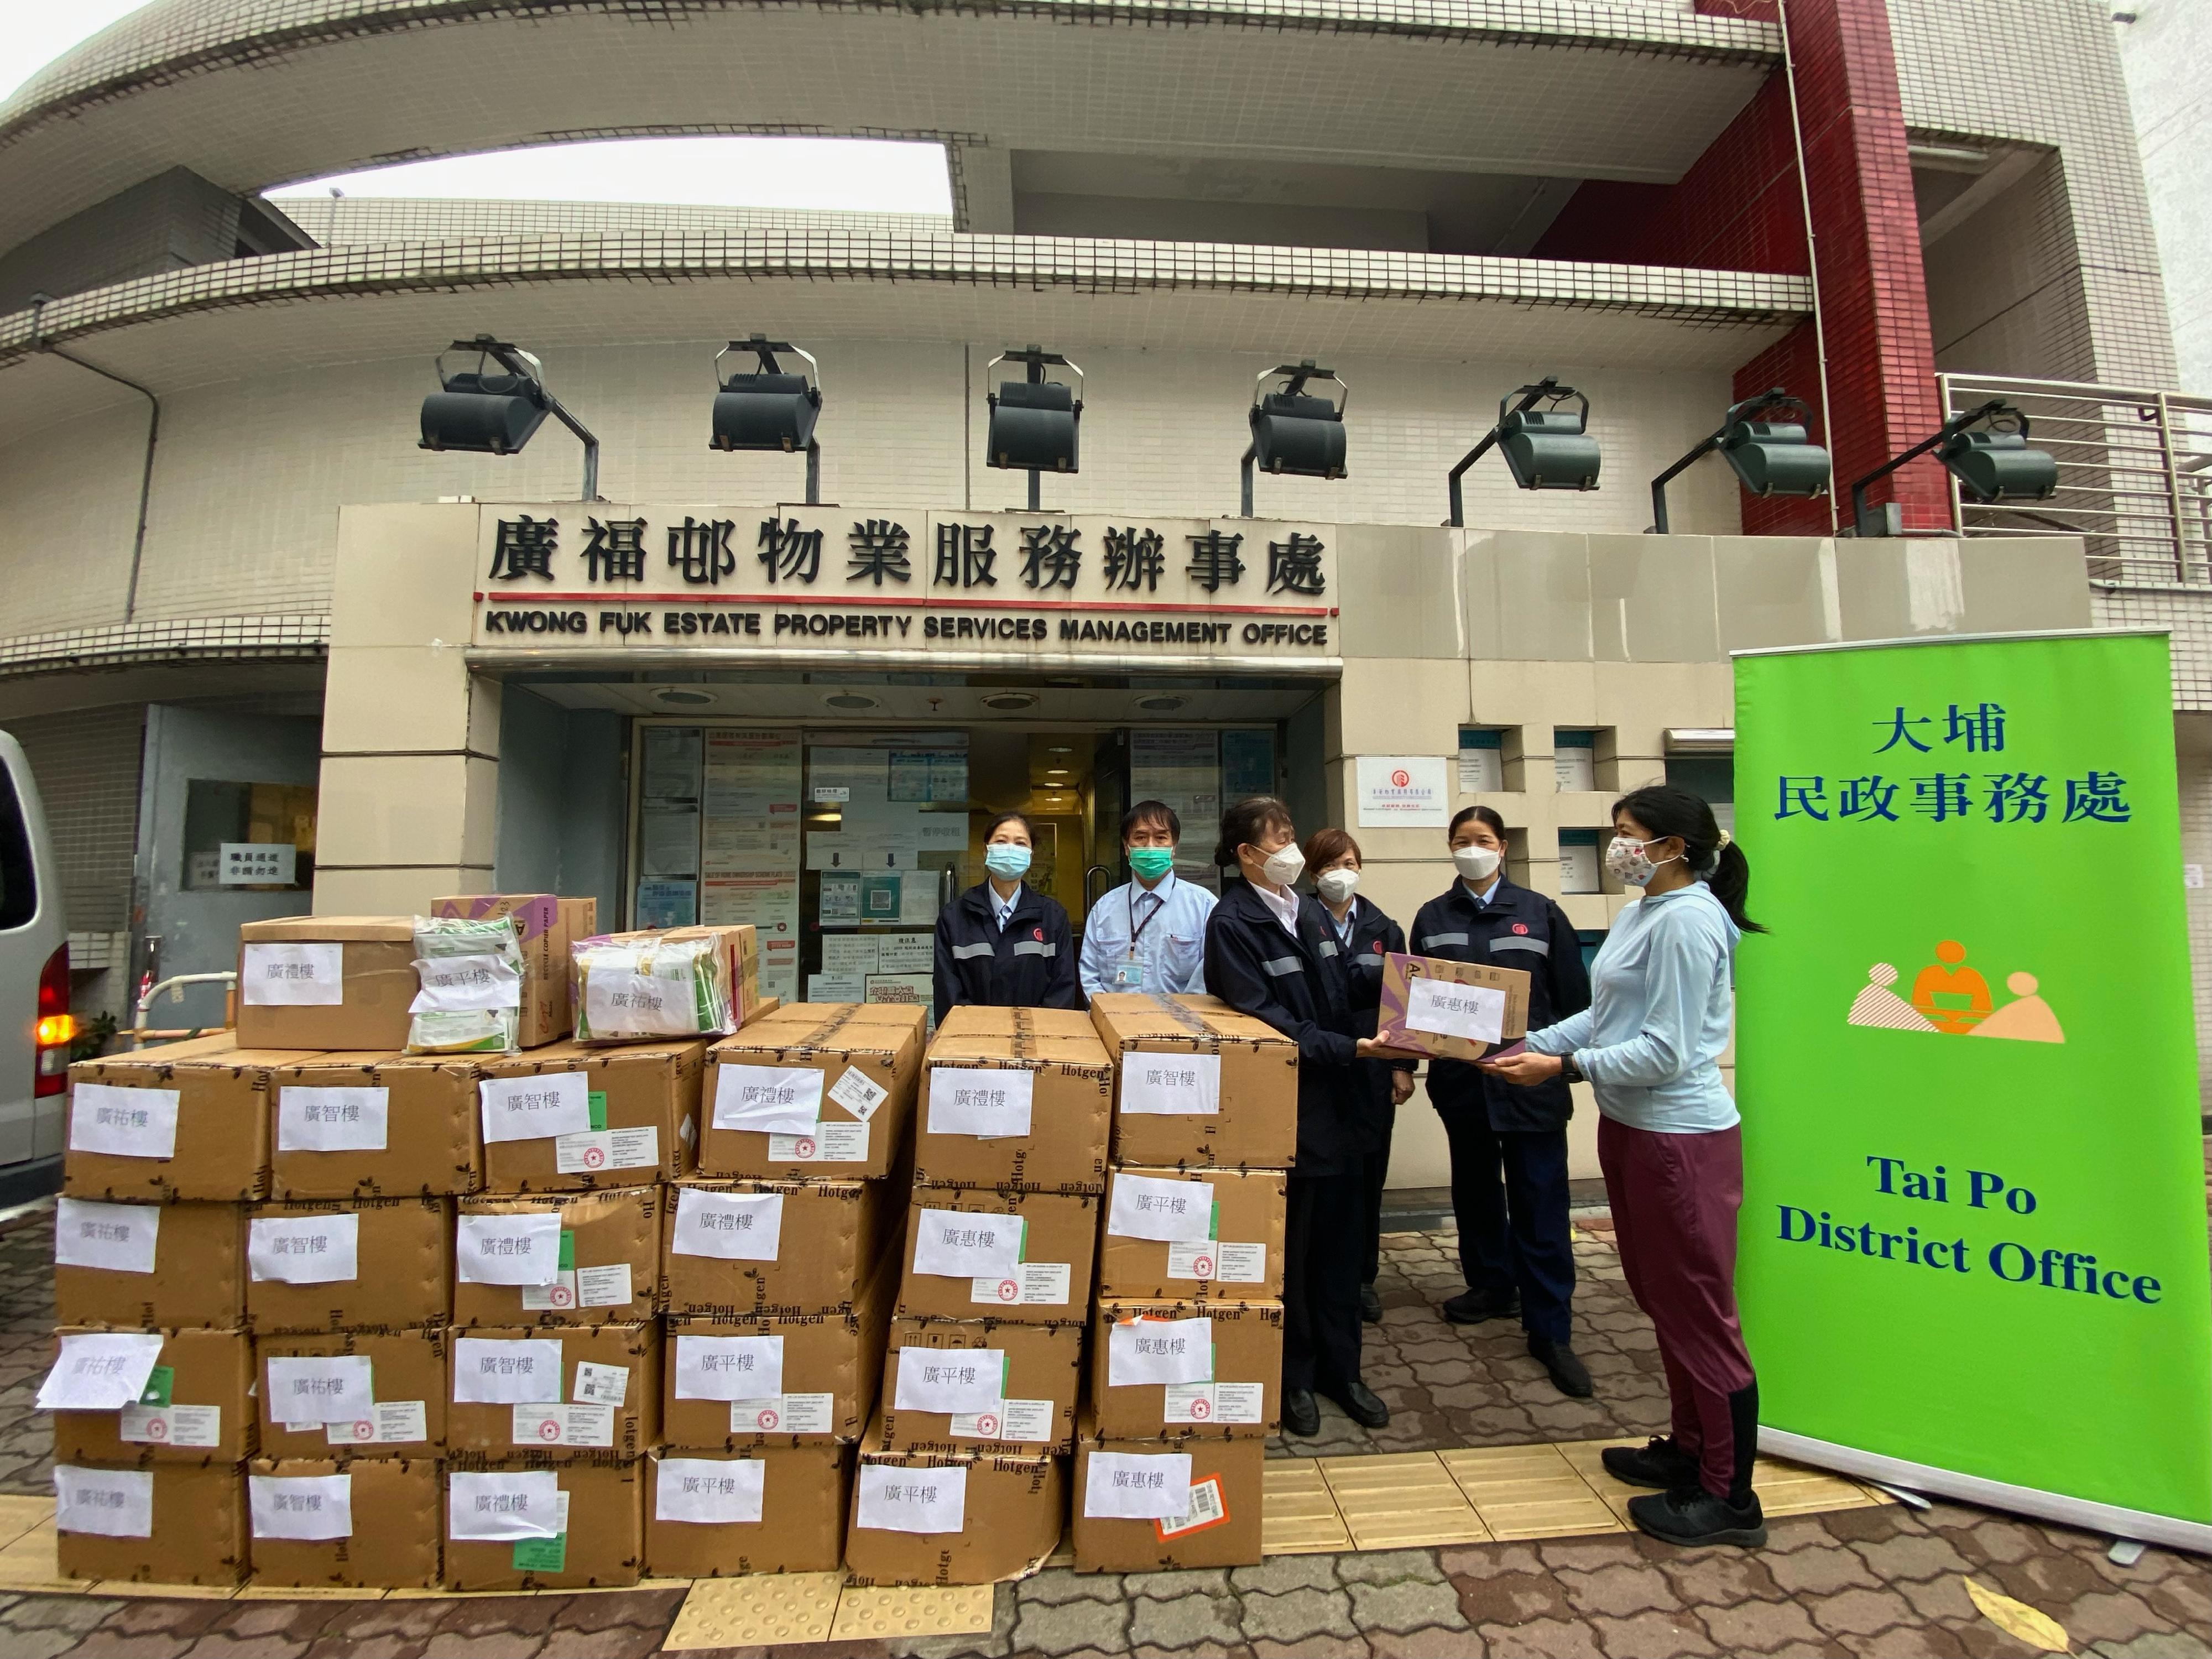 The Tai Po District Office today (March 20) distributed COVID-19 rapid test kits to households, cleansing workers and property management staff living and working in Kwong Fuk Estate for voluntary testing through the property management company.